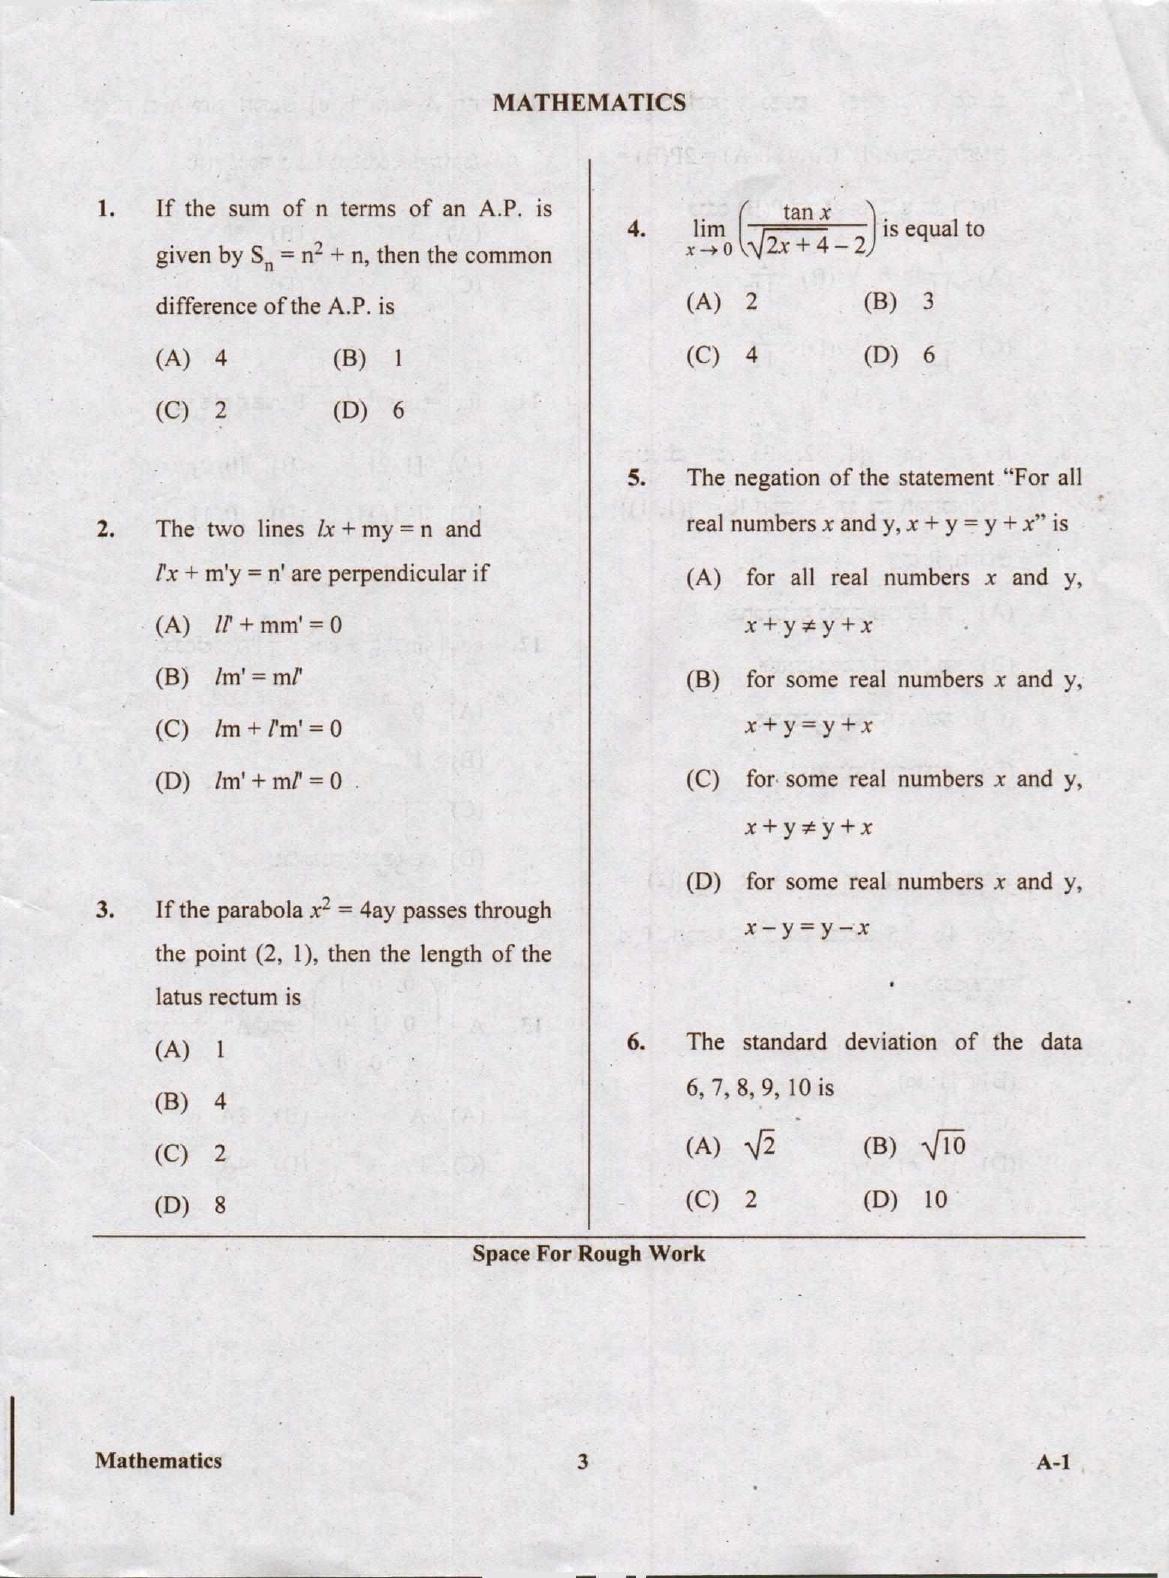 KCET Mathematics 2020 Question Papers - Page 3